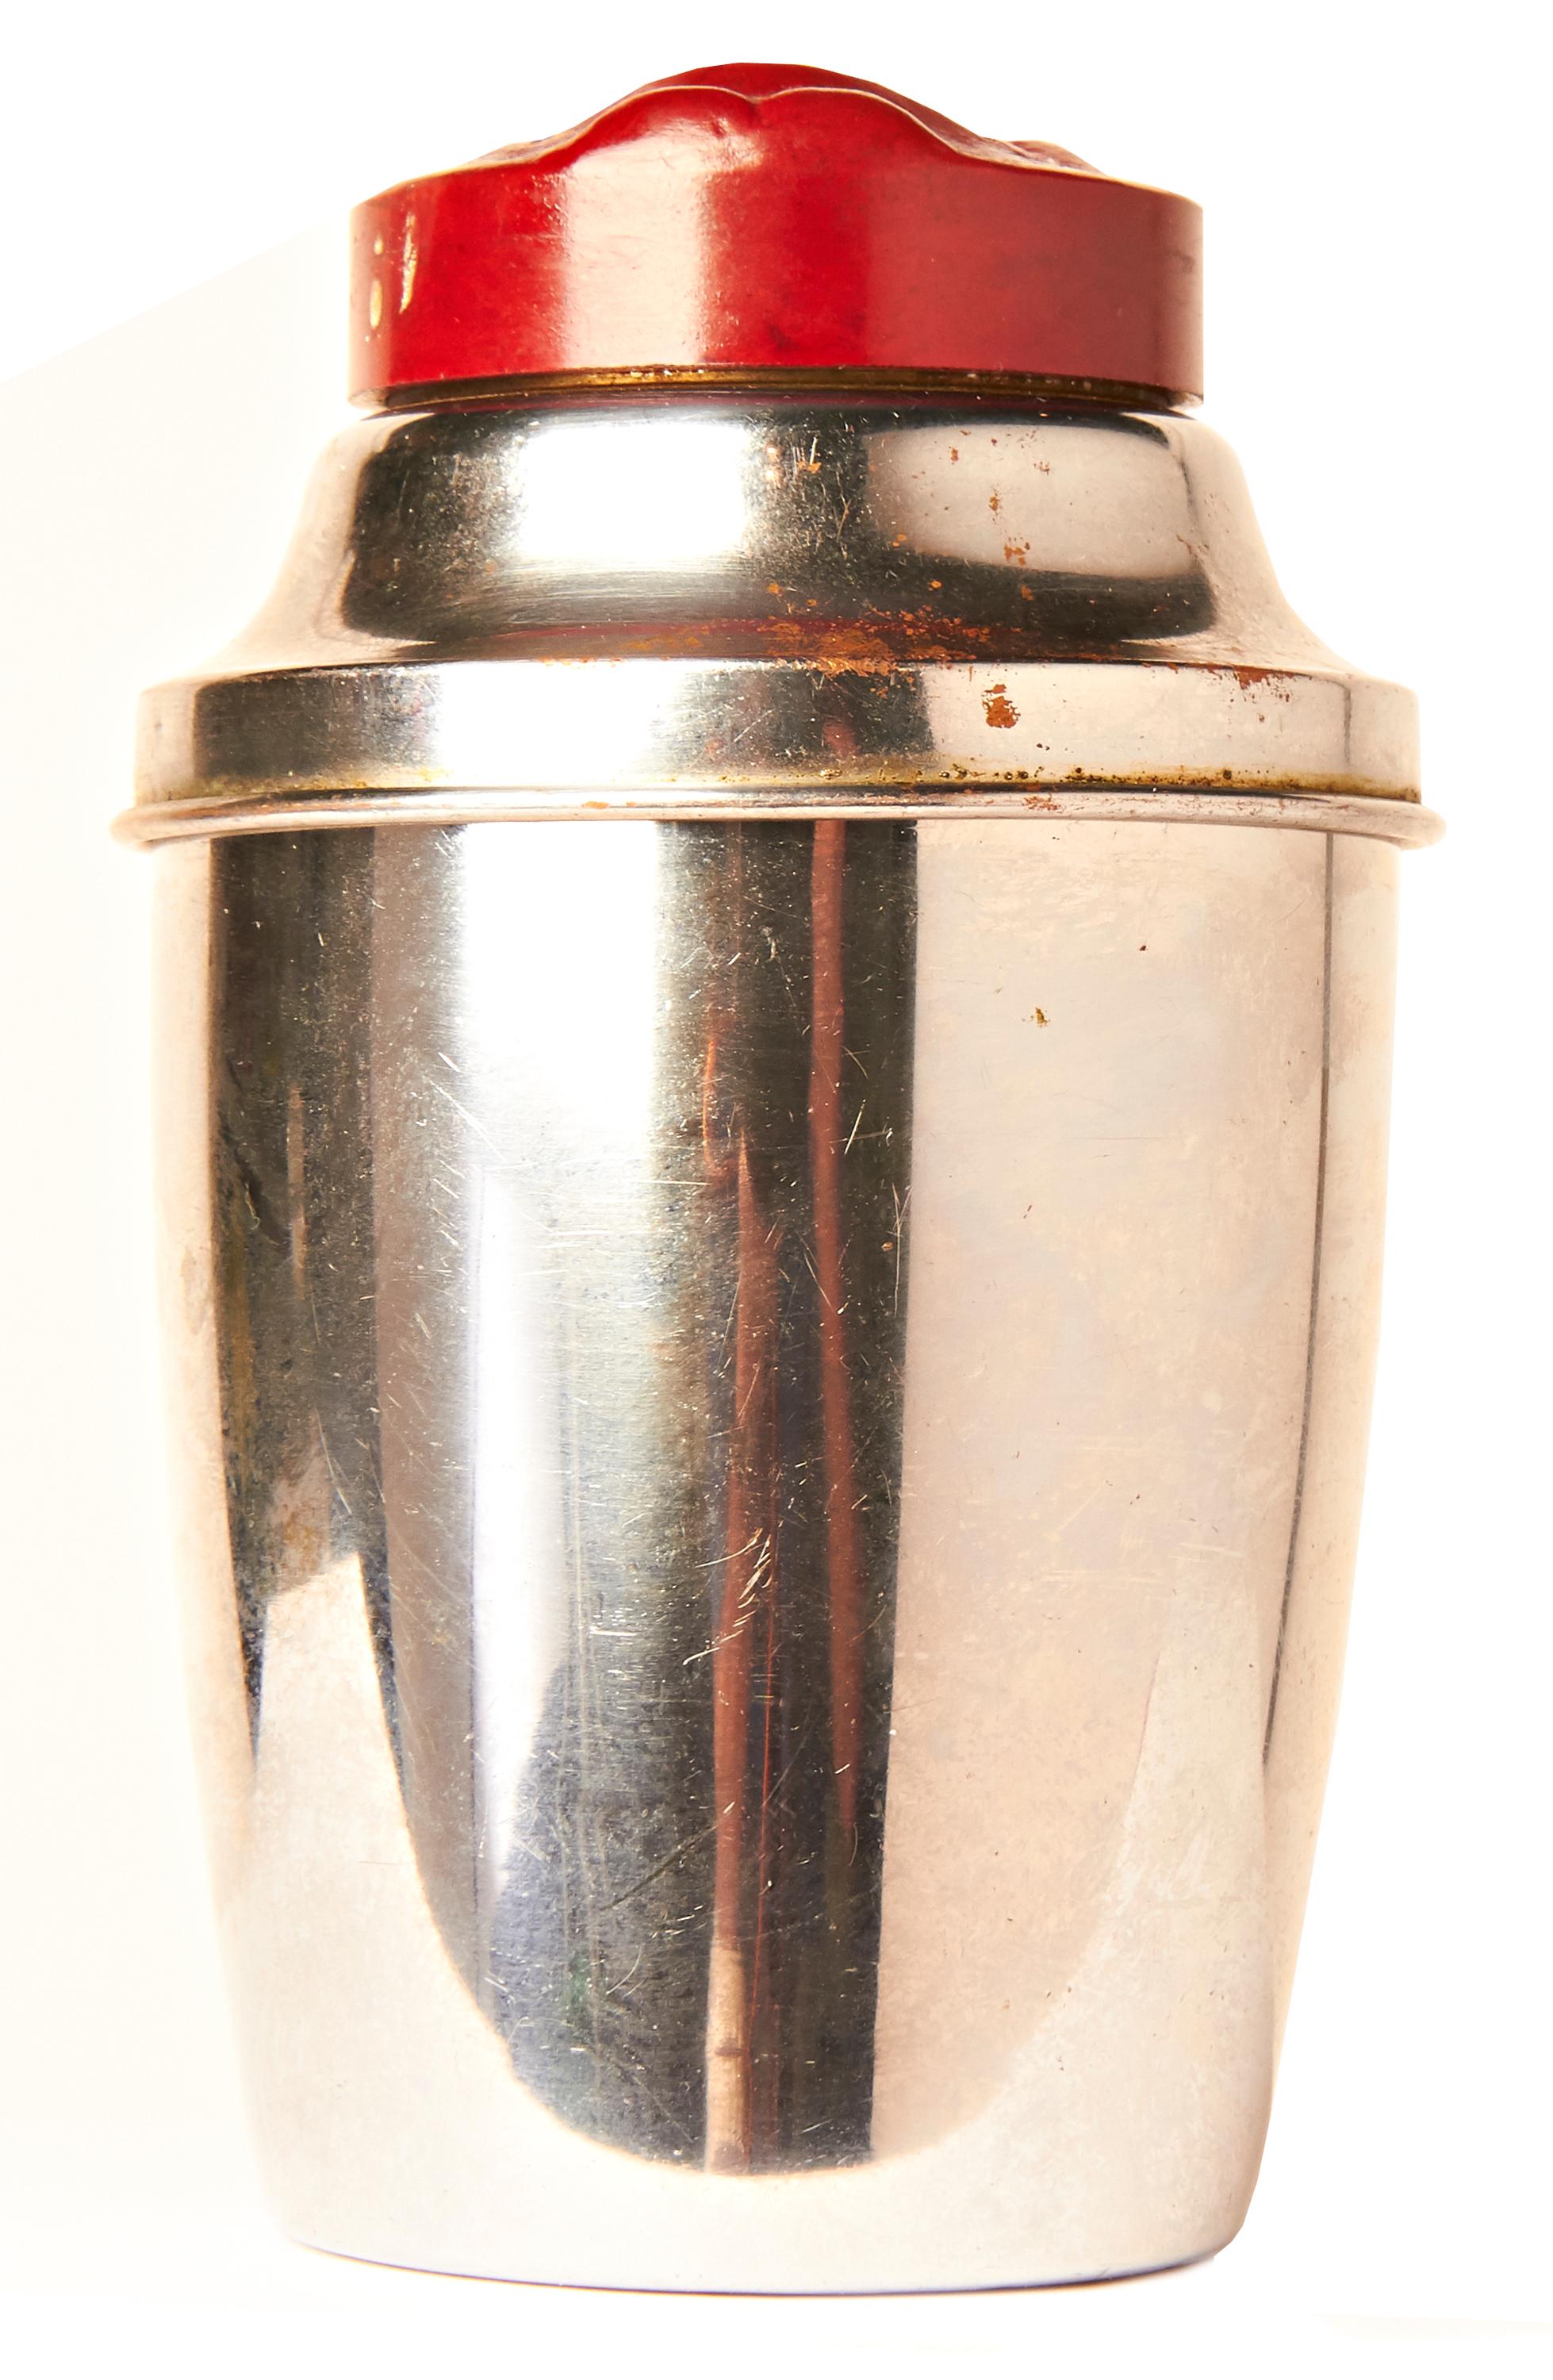 This amusing American Art Deco chrome-plated cocktail Shaker features a burgundy red Bakelite cap with a raised 